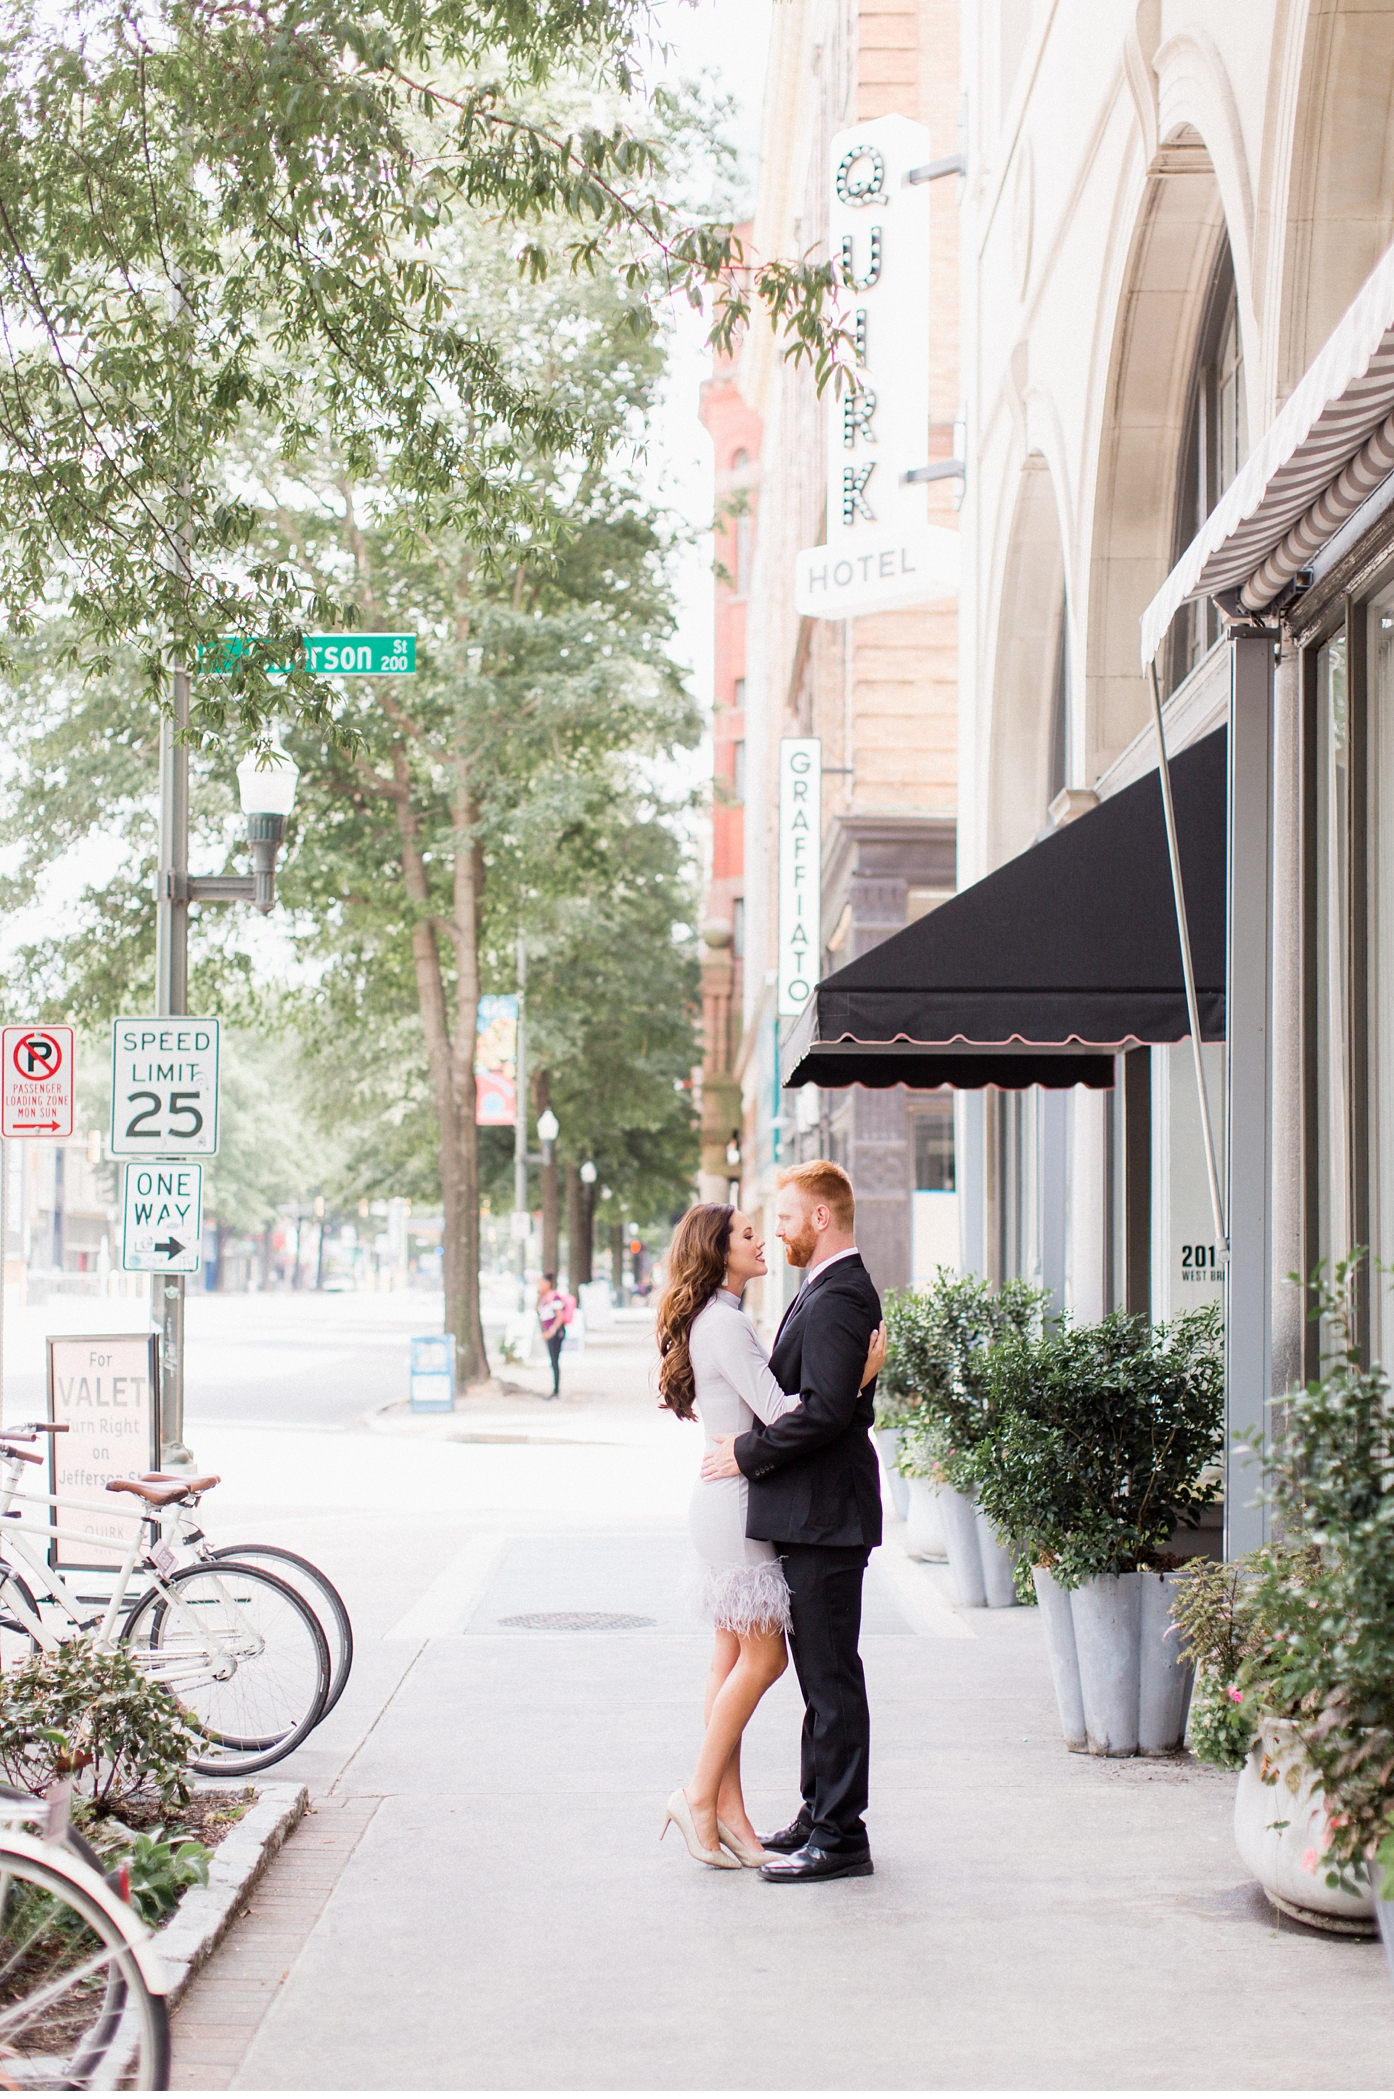 Quirk Hotel Glam Engagement Session in Richmond Virginia by Alisandra Photography